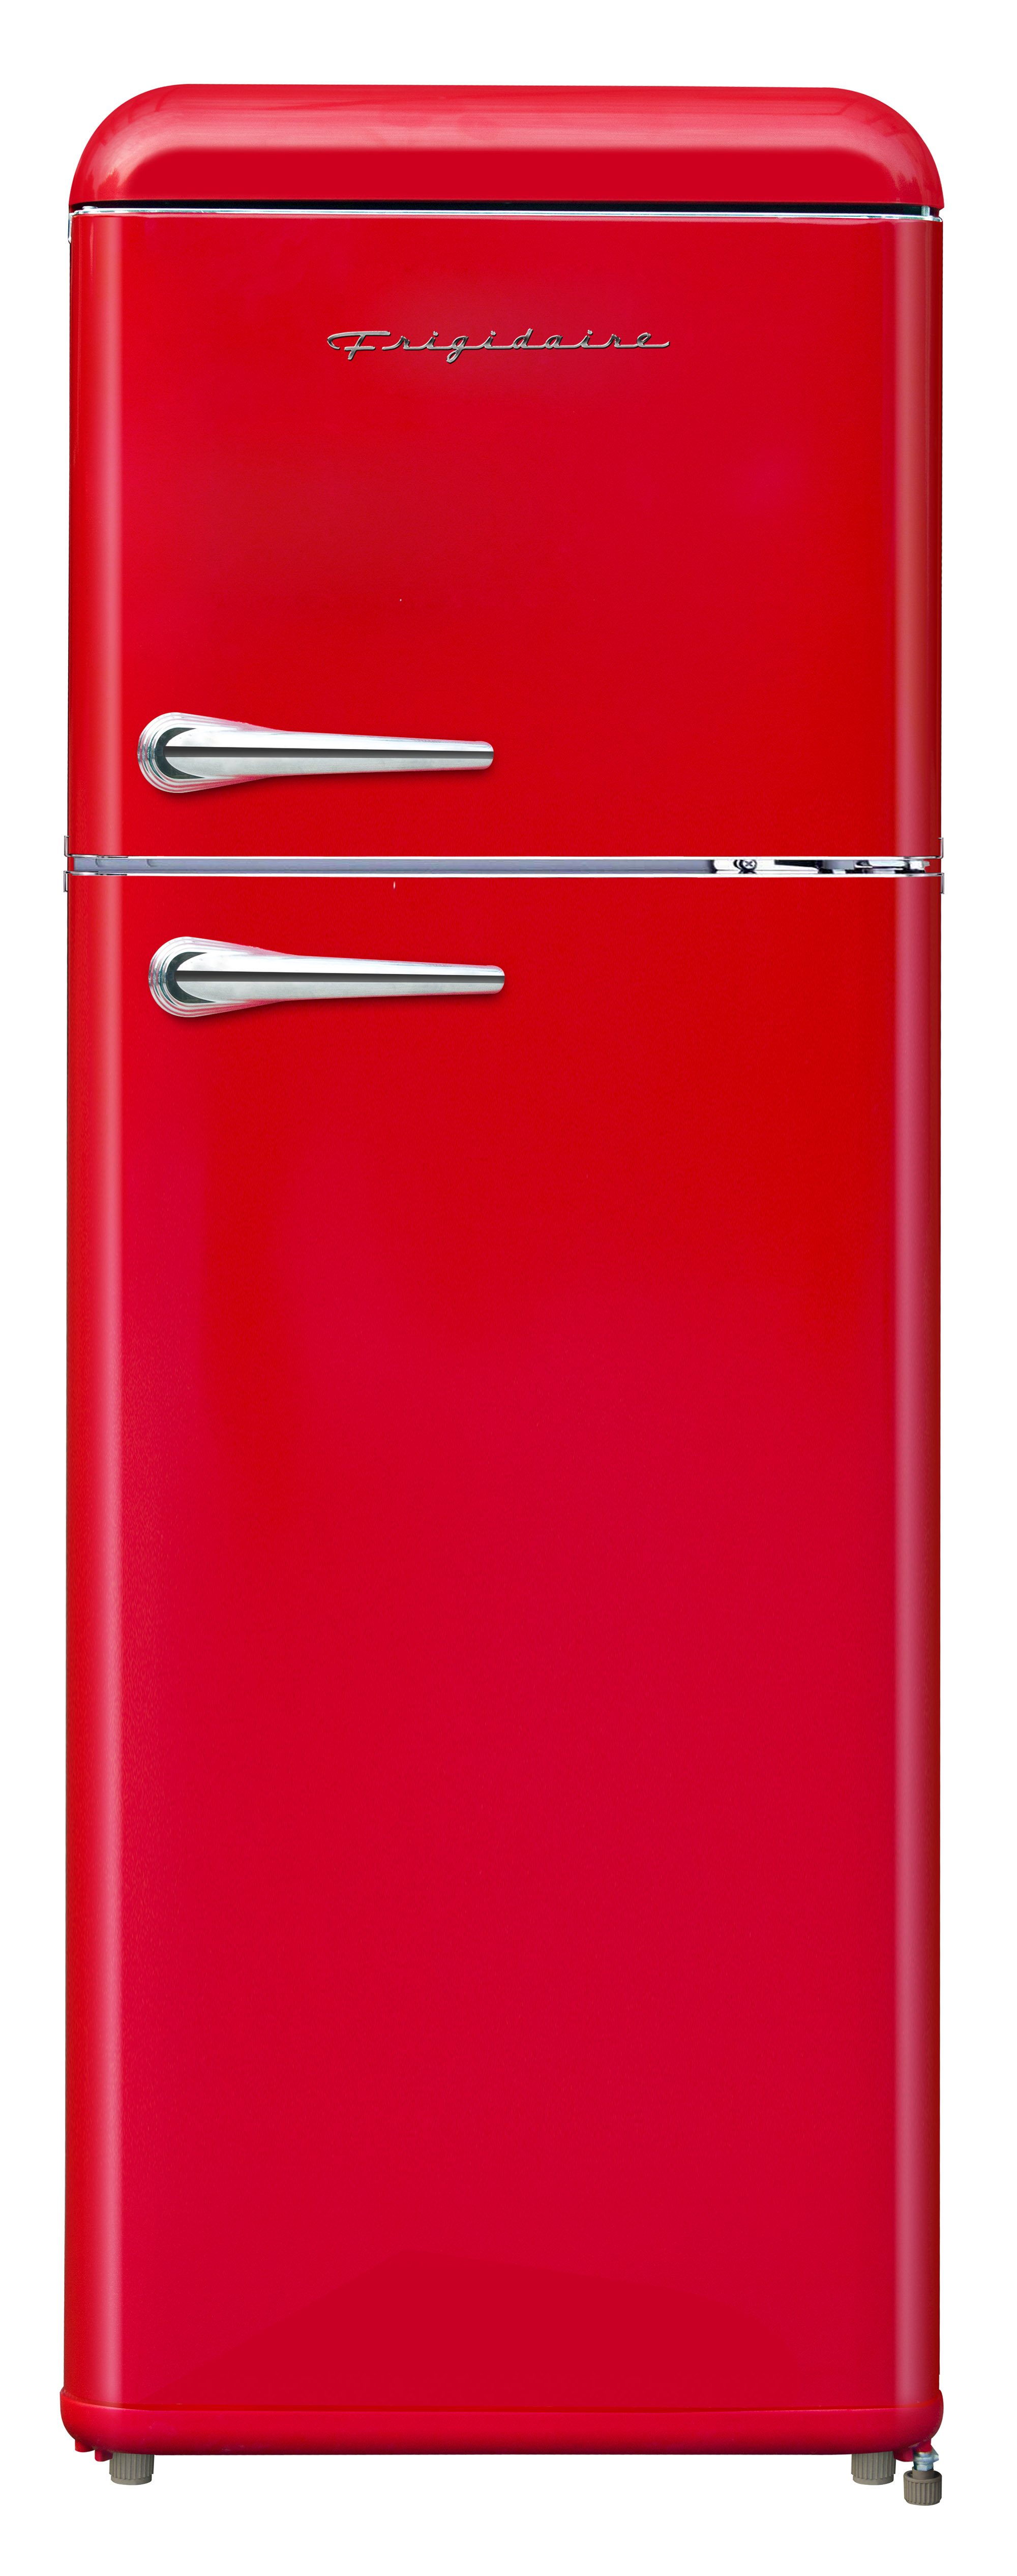 Frigidaire 7.5 Cu. Ft. Top Freezer Refrigerator in RED, Rounded Corners - RETRO, EFR756 - image 1 of 5